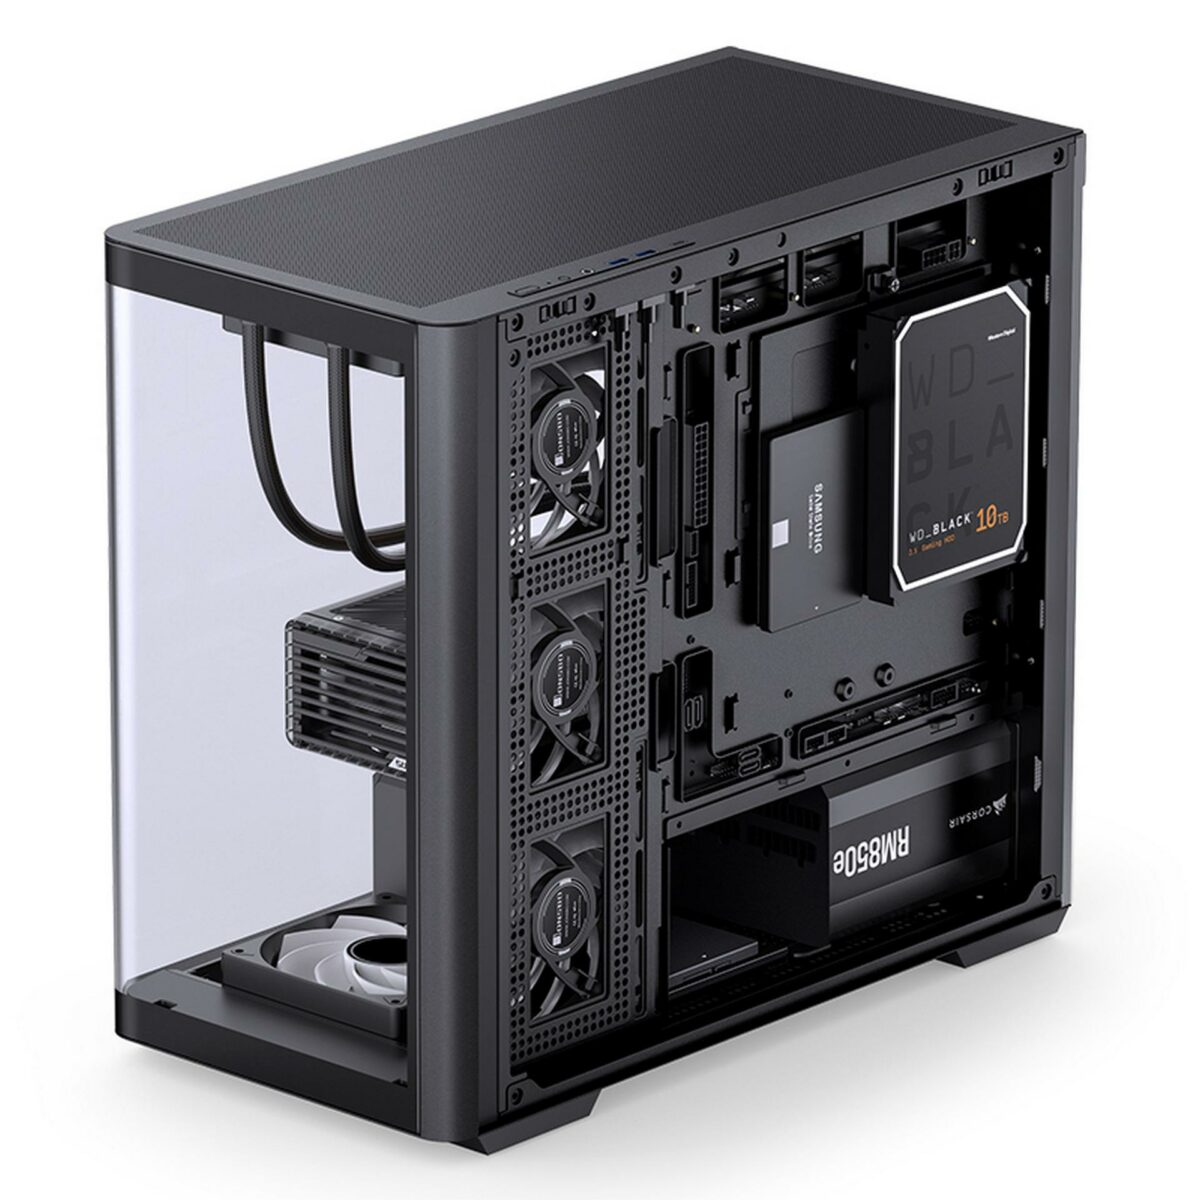 Black Jonsbo D300 PC chassis right side.